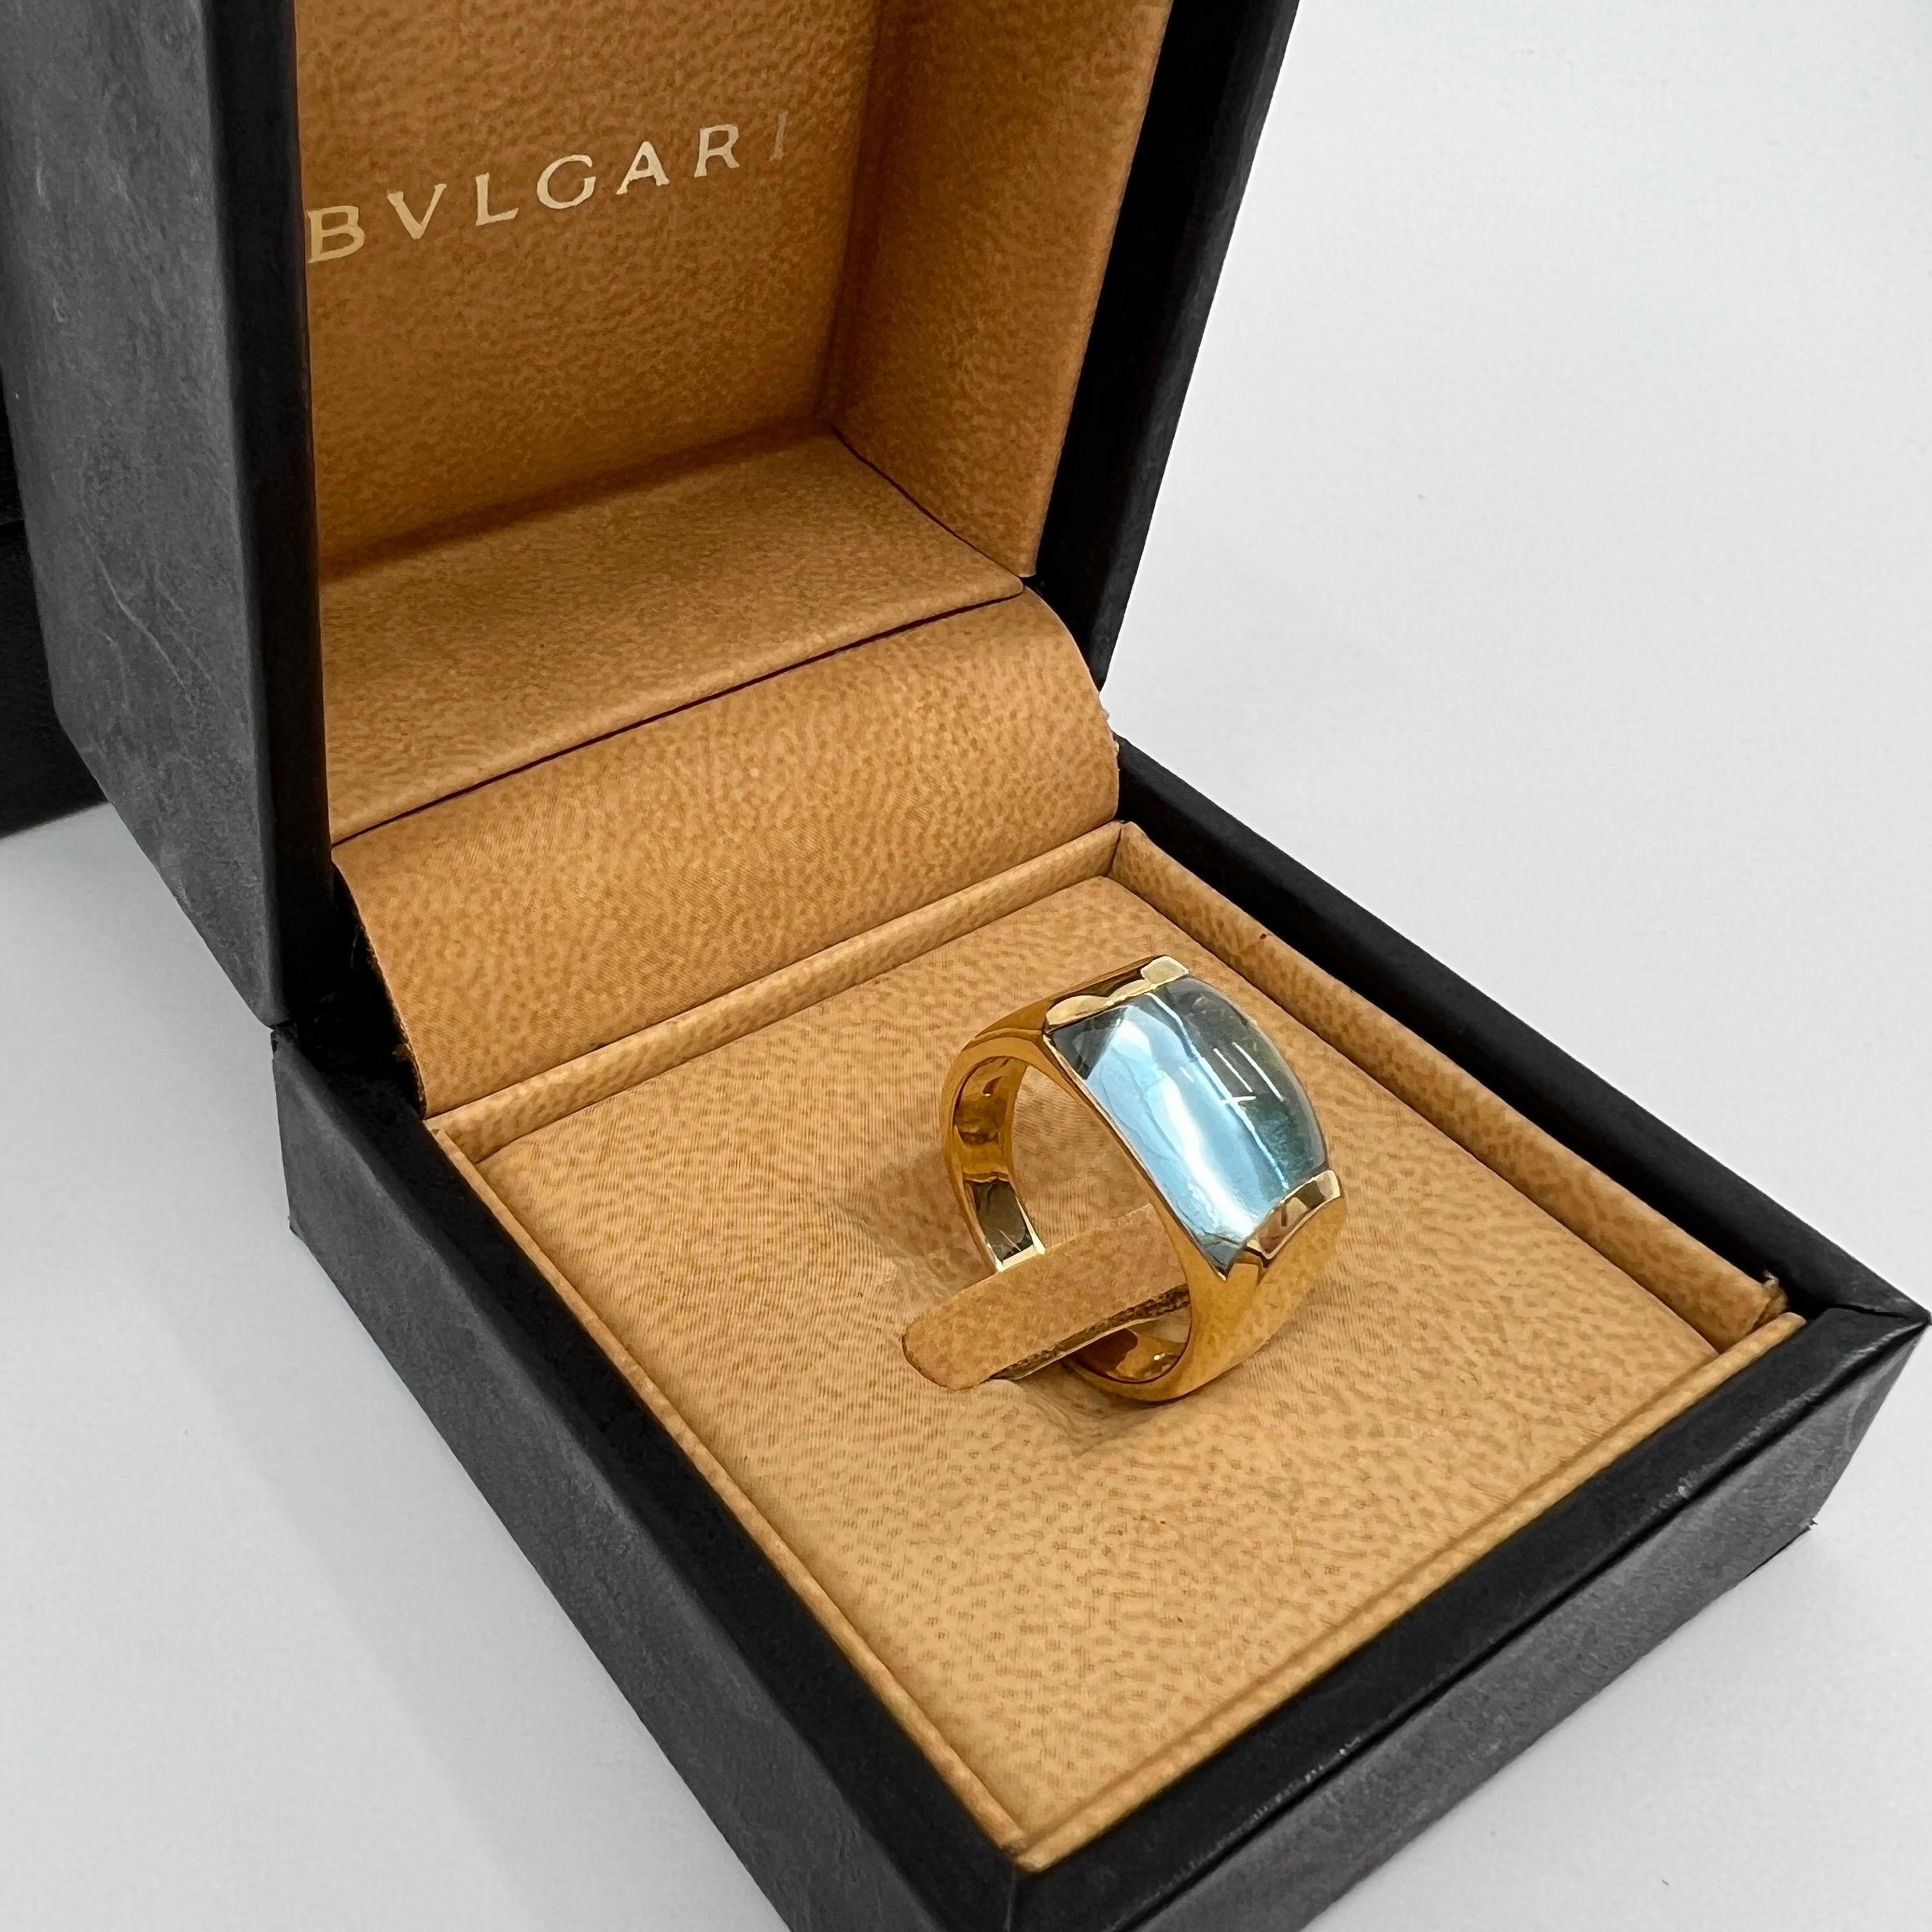 Vintage Bvlgari Tronchetto 18k Yellow Gold Blue Topaz Dome Ring.

Beautiful domed blue topaz set in a fine 18k yellow gold tension set ring. Bold and stunning ring from the Bvlgari Tronchetto collection.

In excellent condition, has been